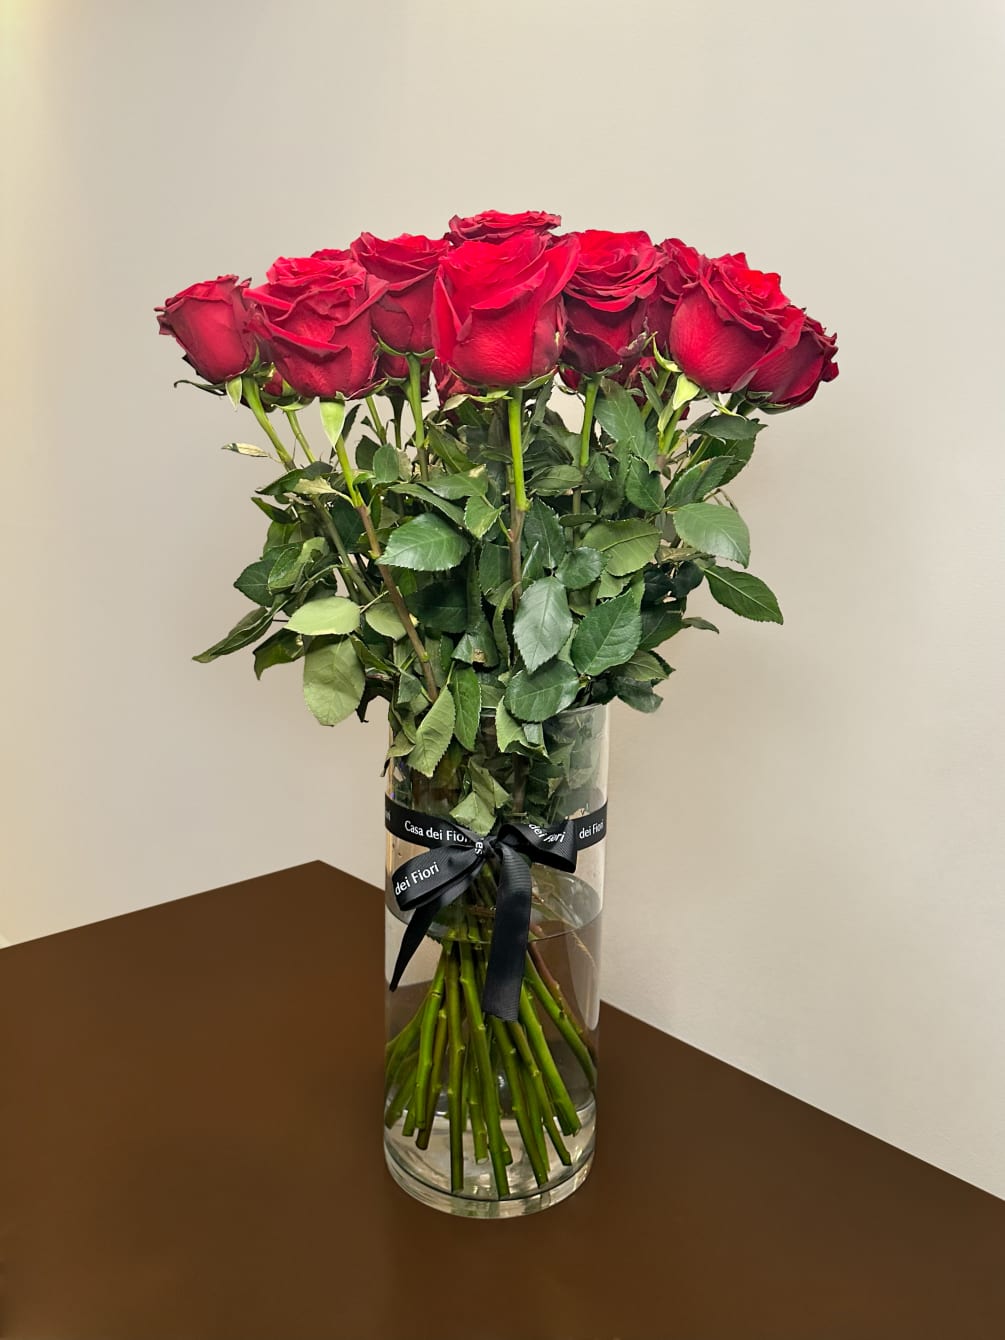 Gorgeous red long stem roses in a tall vase